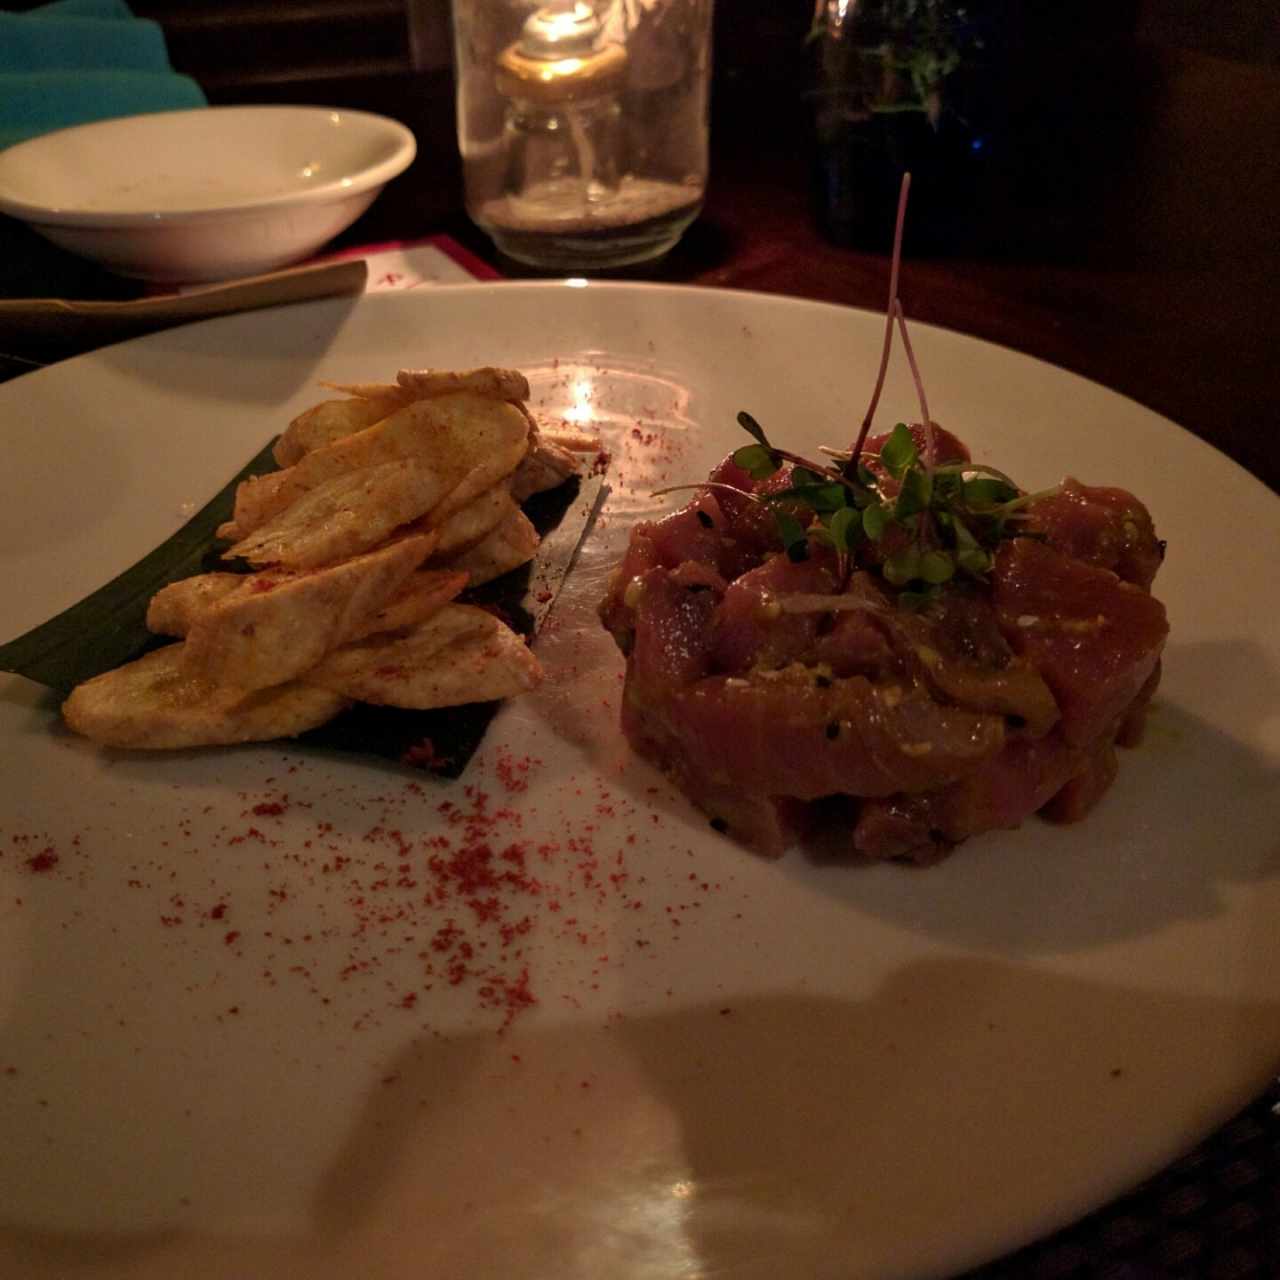 Tuna tartar with a side of green platain chips